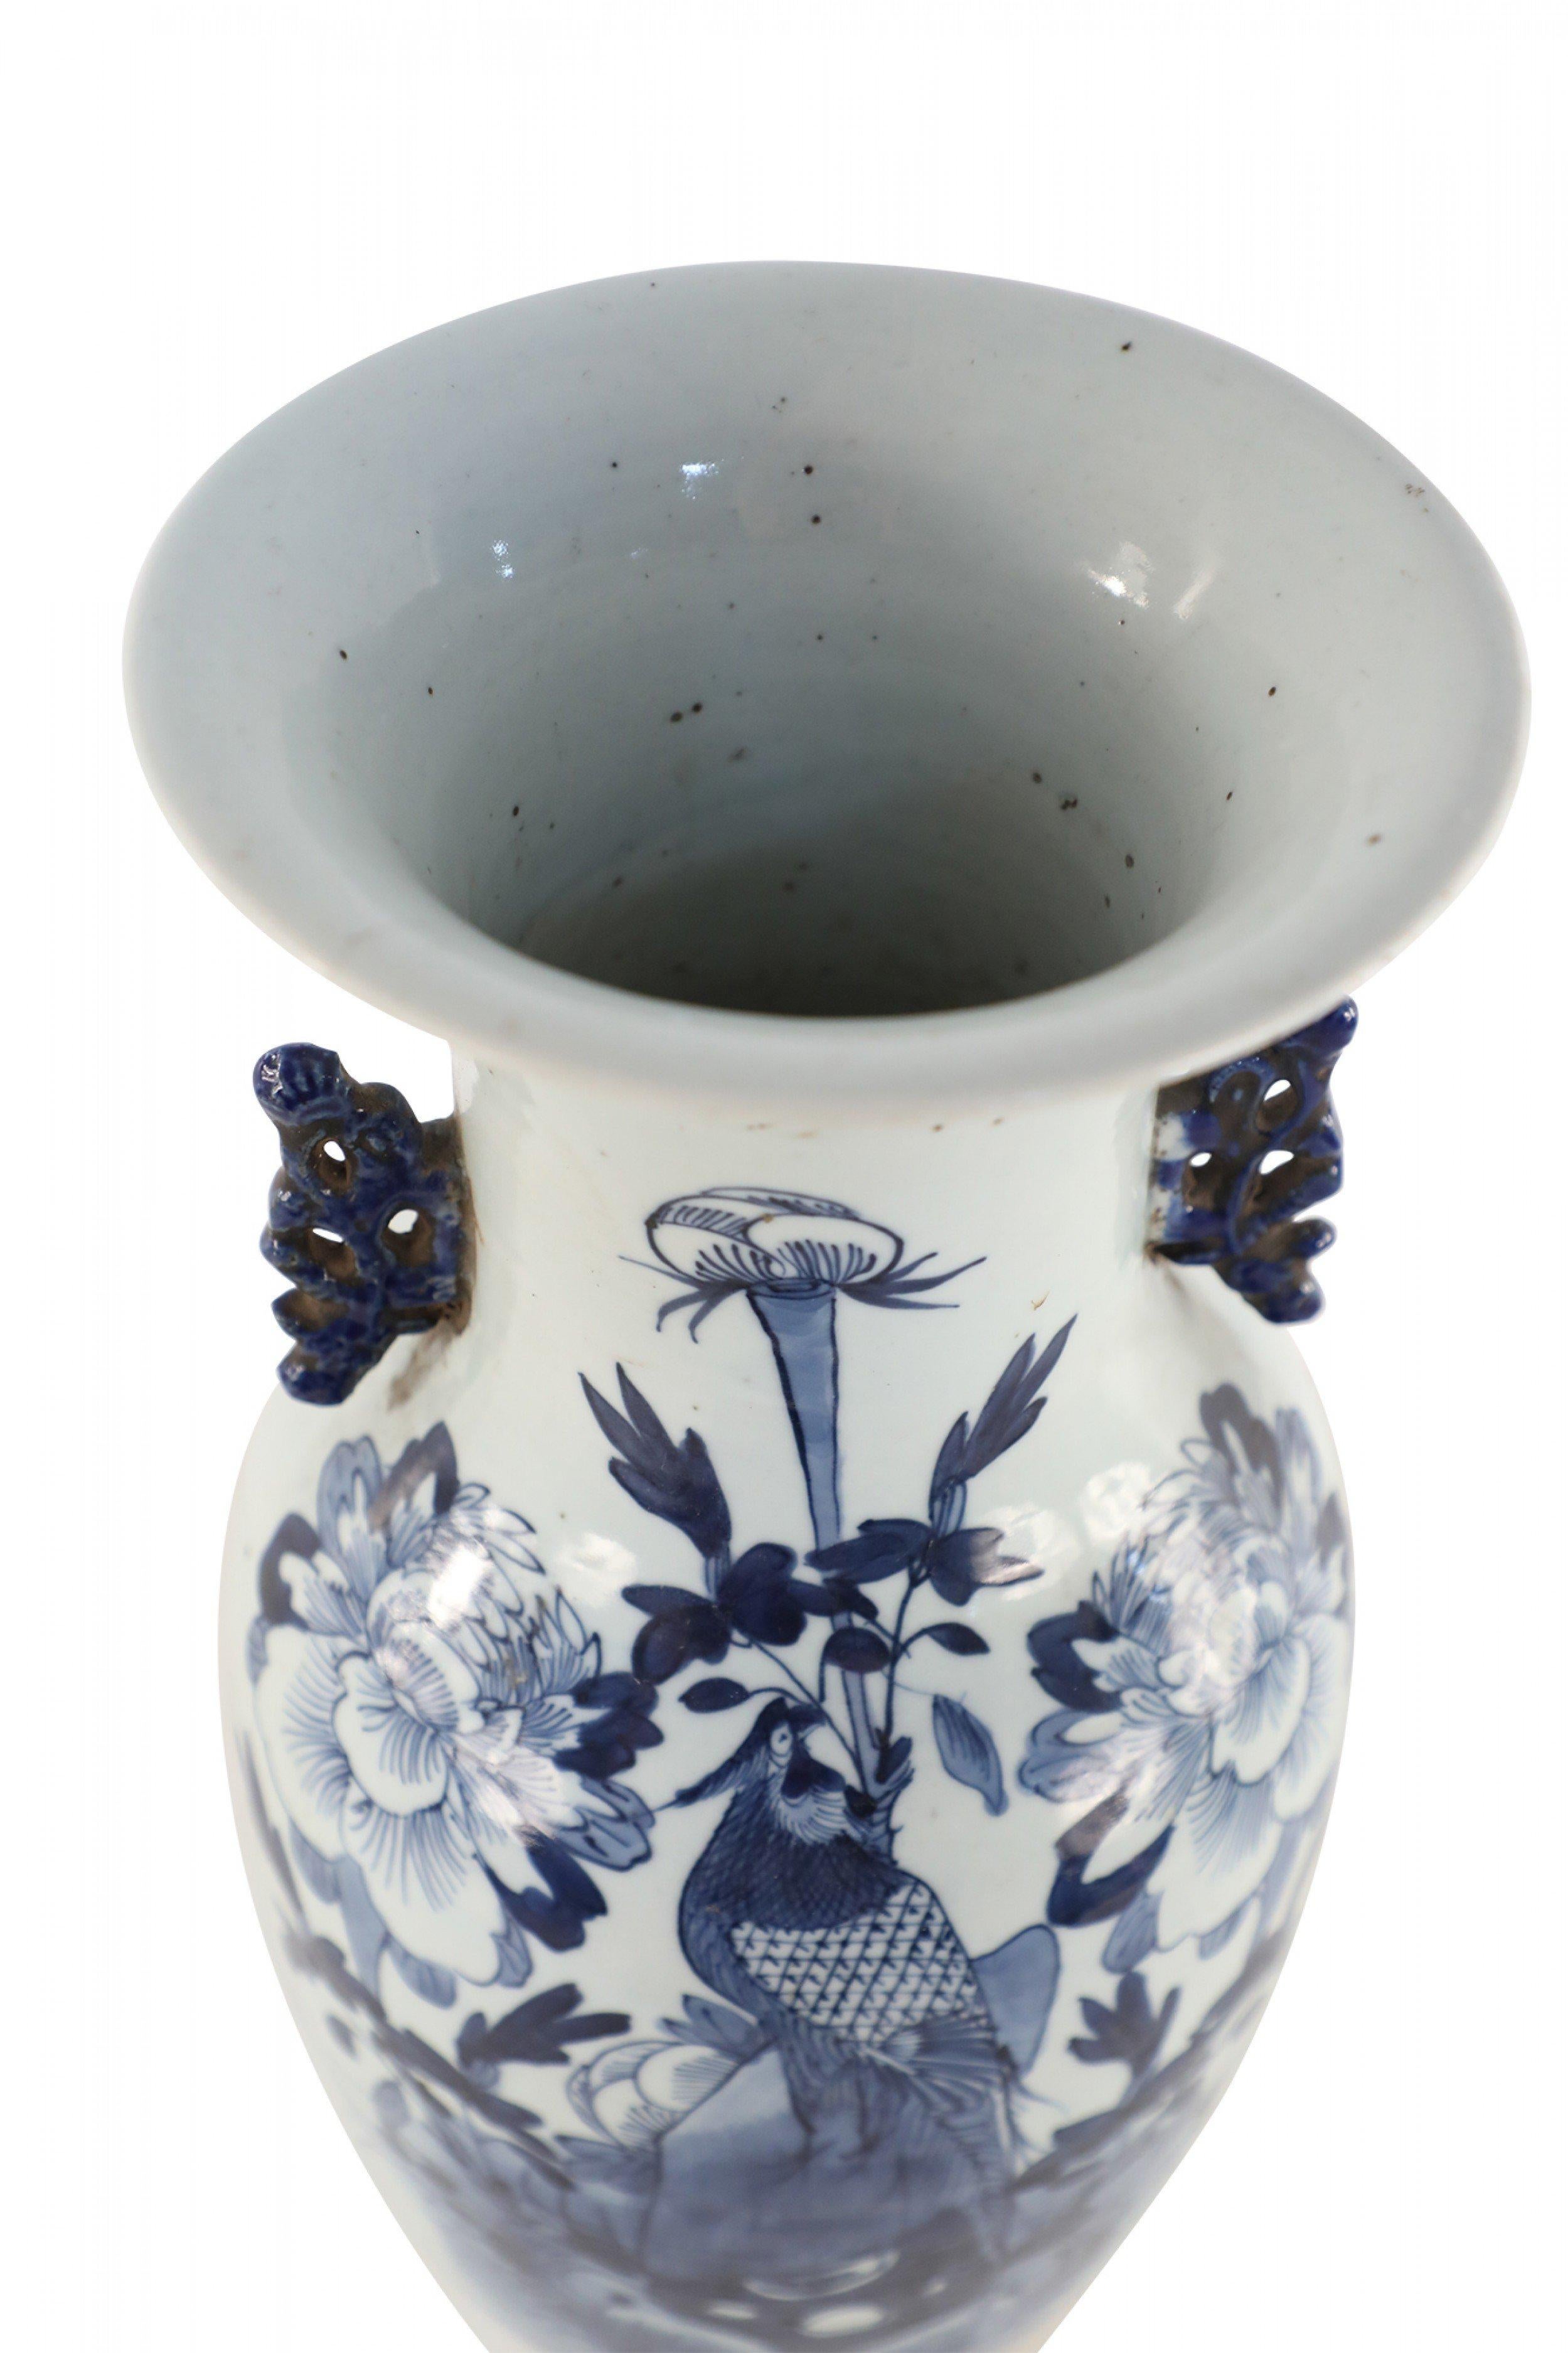 Chinese White and Blue Garden and Bird Design Porcelain Urn For Sale 5